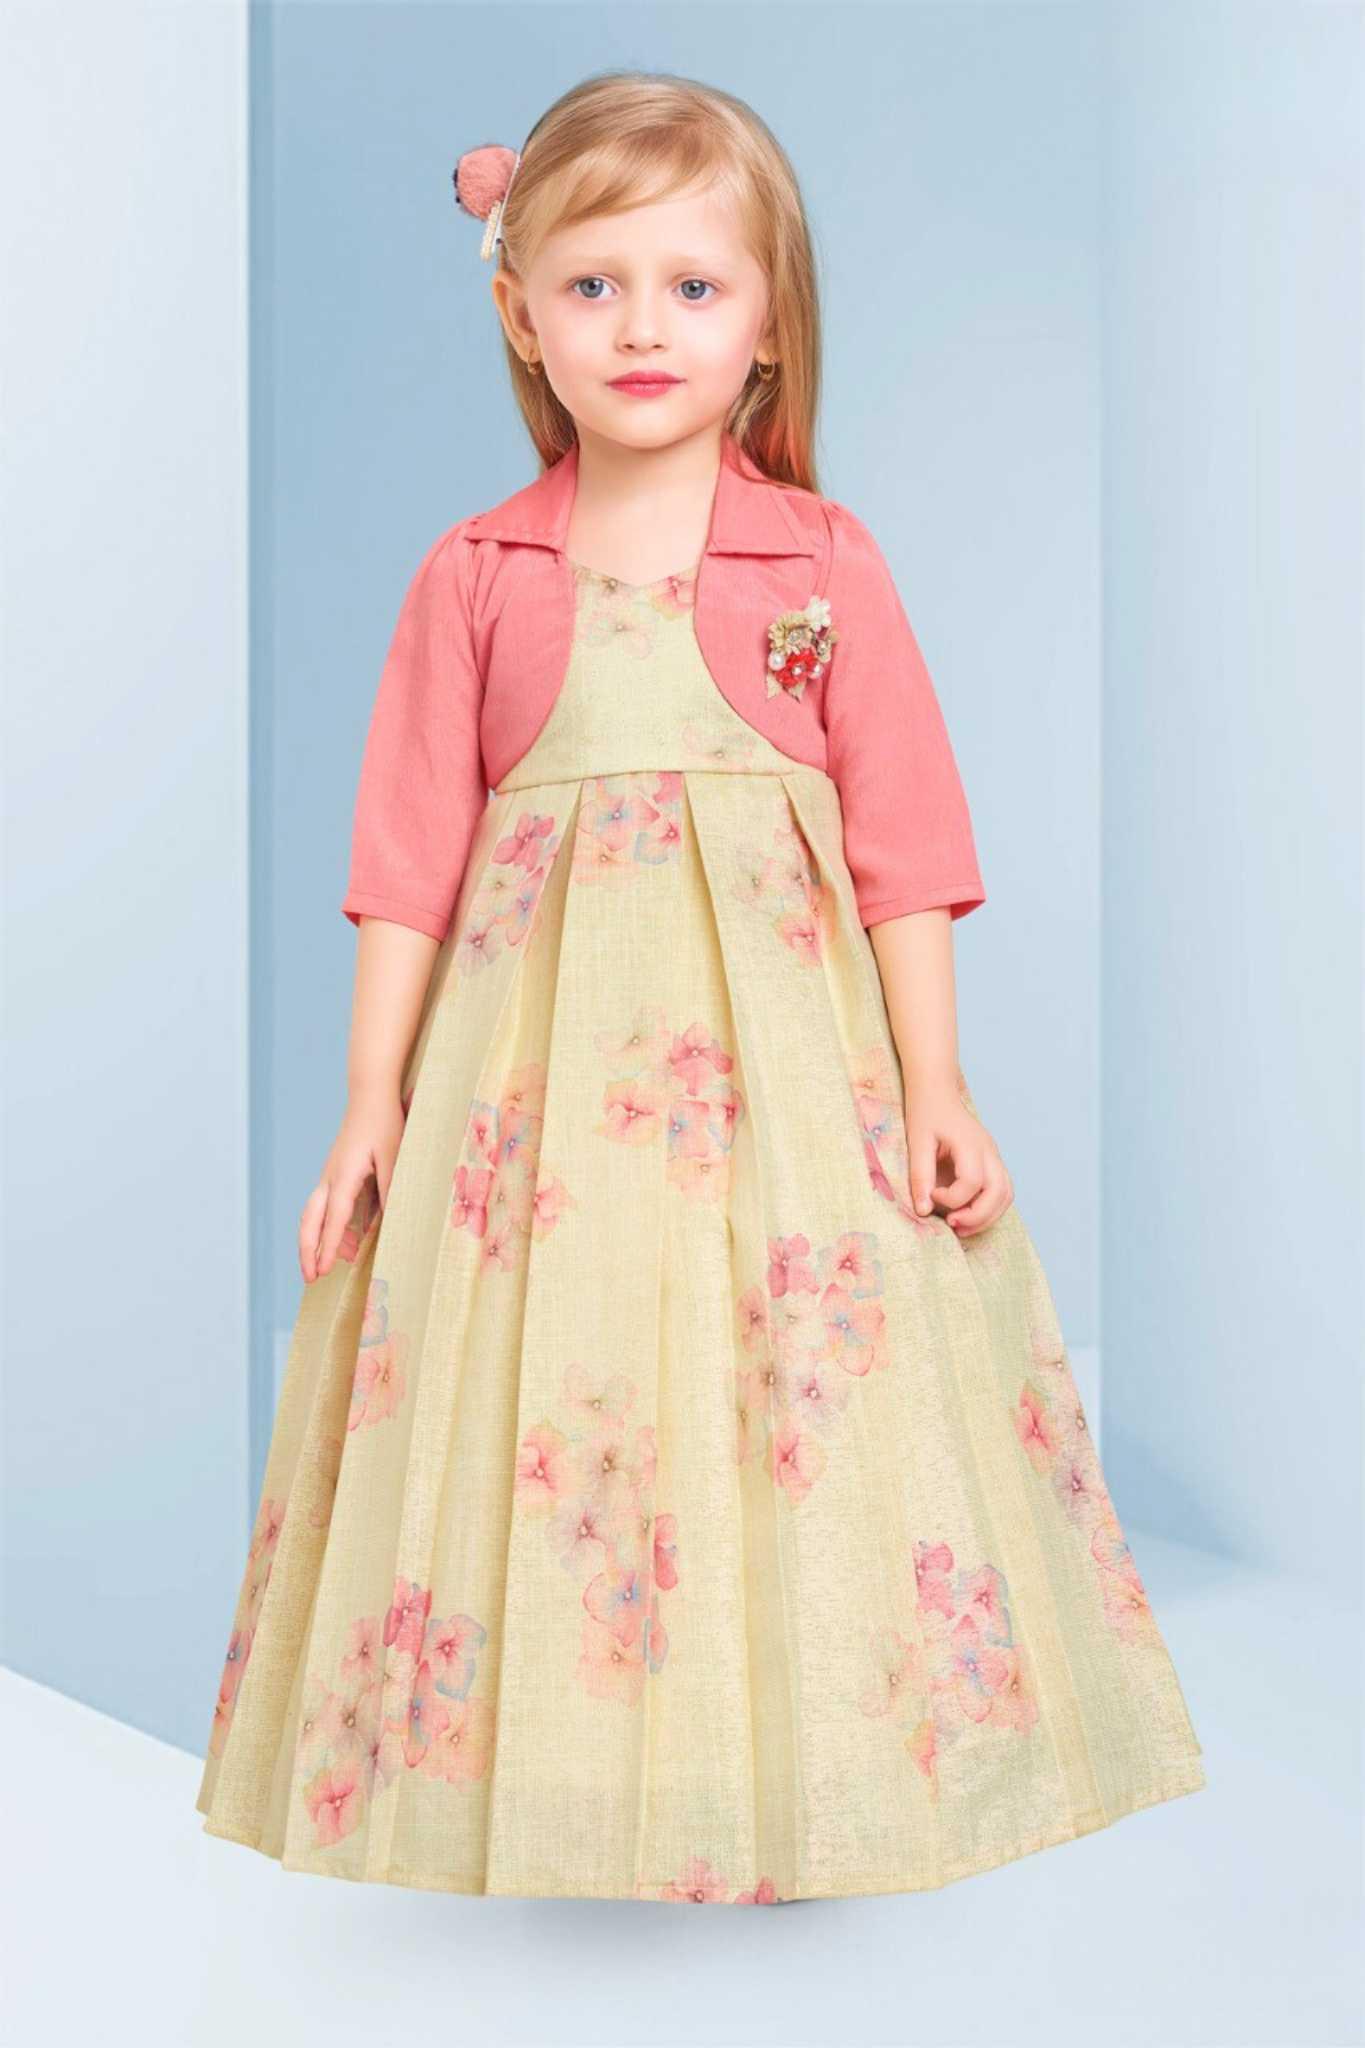 Floral Printed Pale Yellow Gown With Pink Coat For Girls - Lagorii Kids